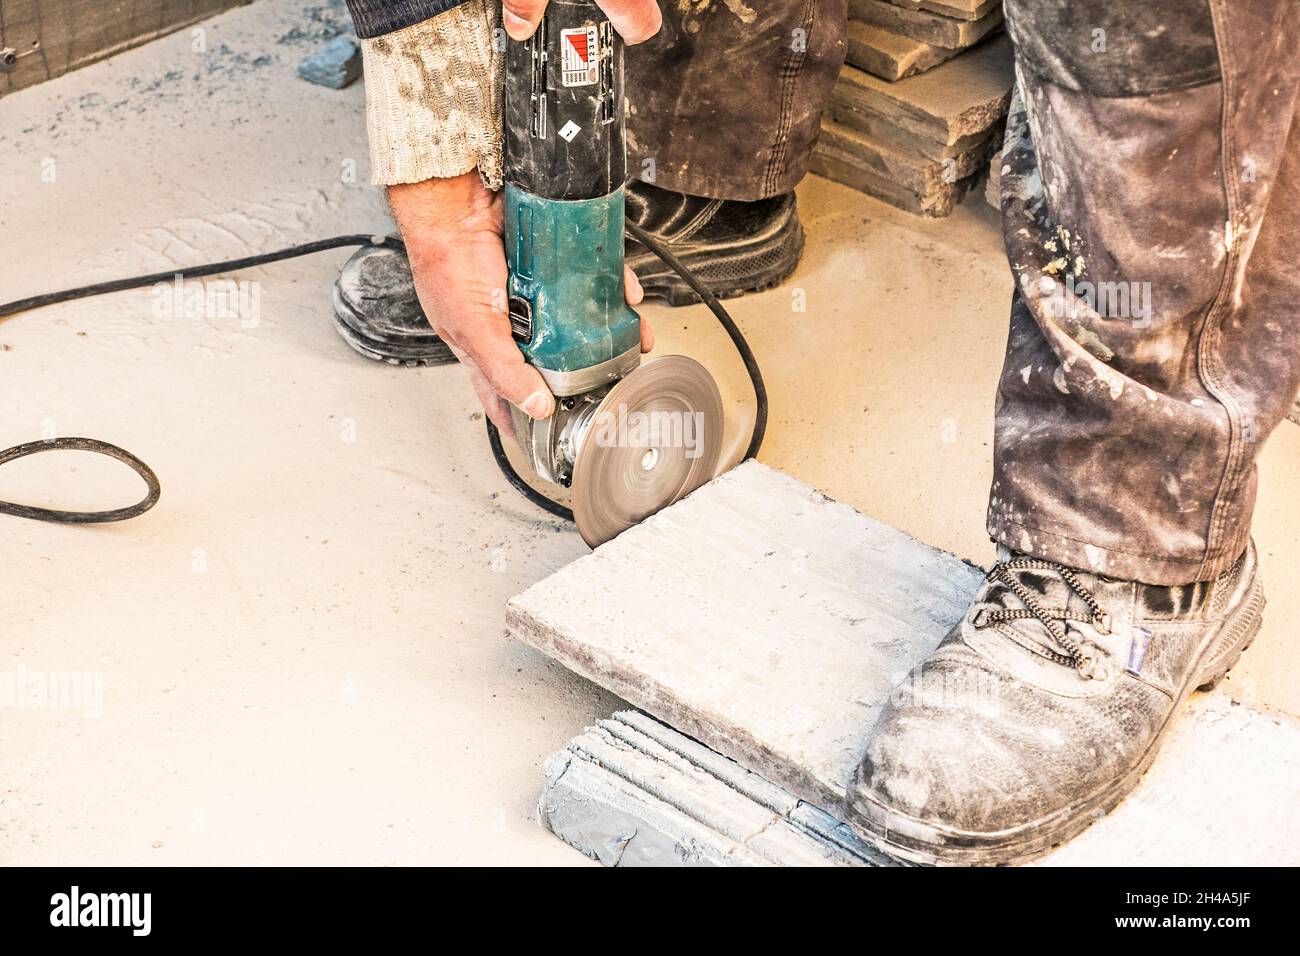 A man polishes a granite slab with a grinder. Work on stone with an angle grinder. A worker polishes a white stone. Stock Photo